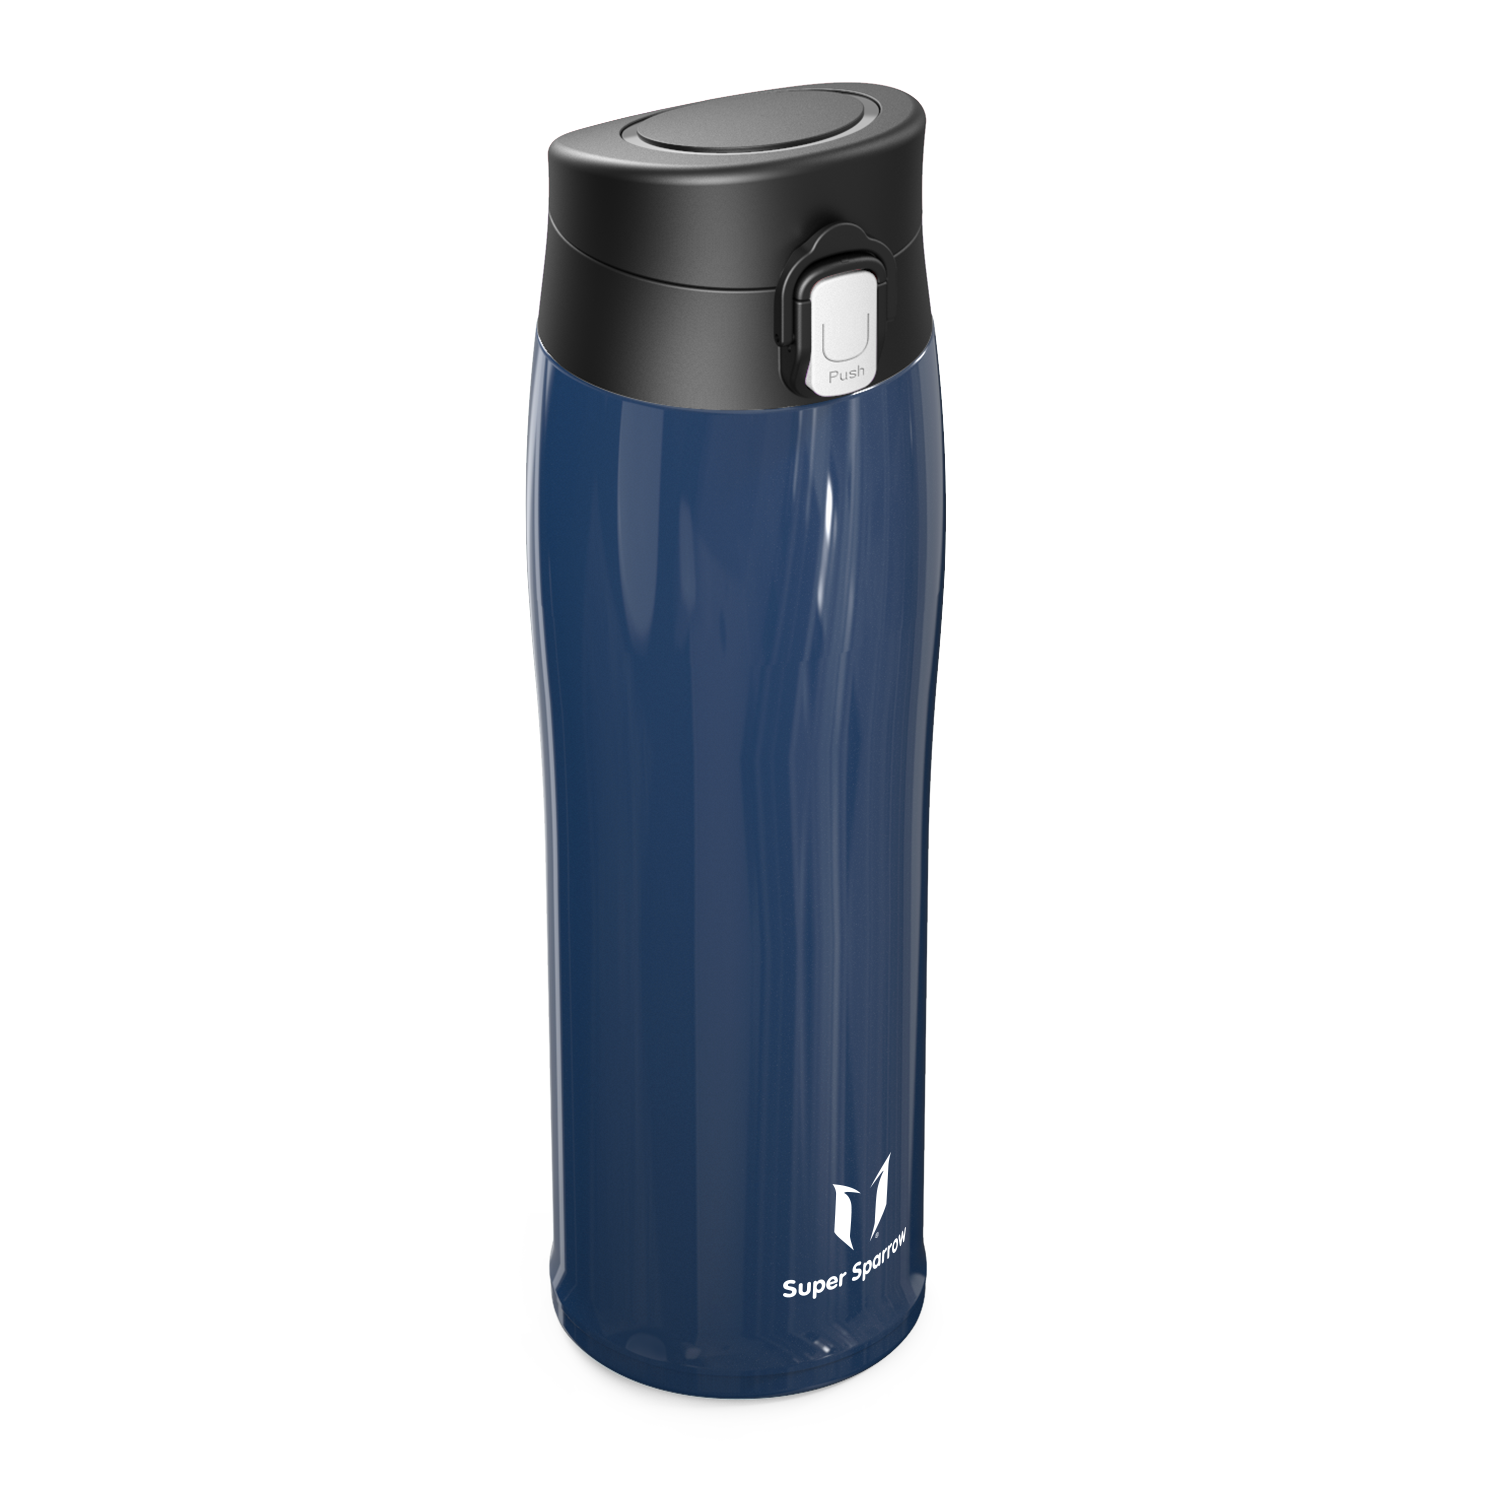 Super Sparrow Wide Mouth Insulated Water Bottle 750ml/25oz – Trend Poppy